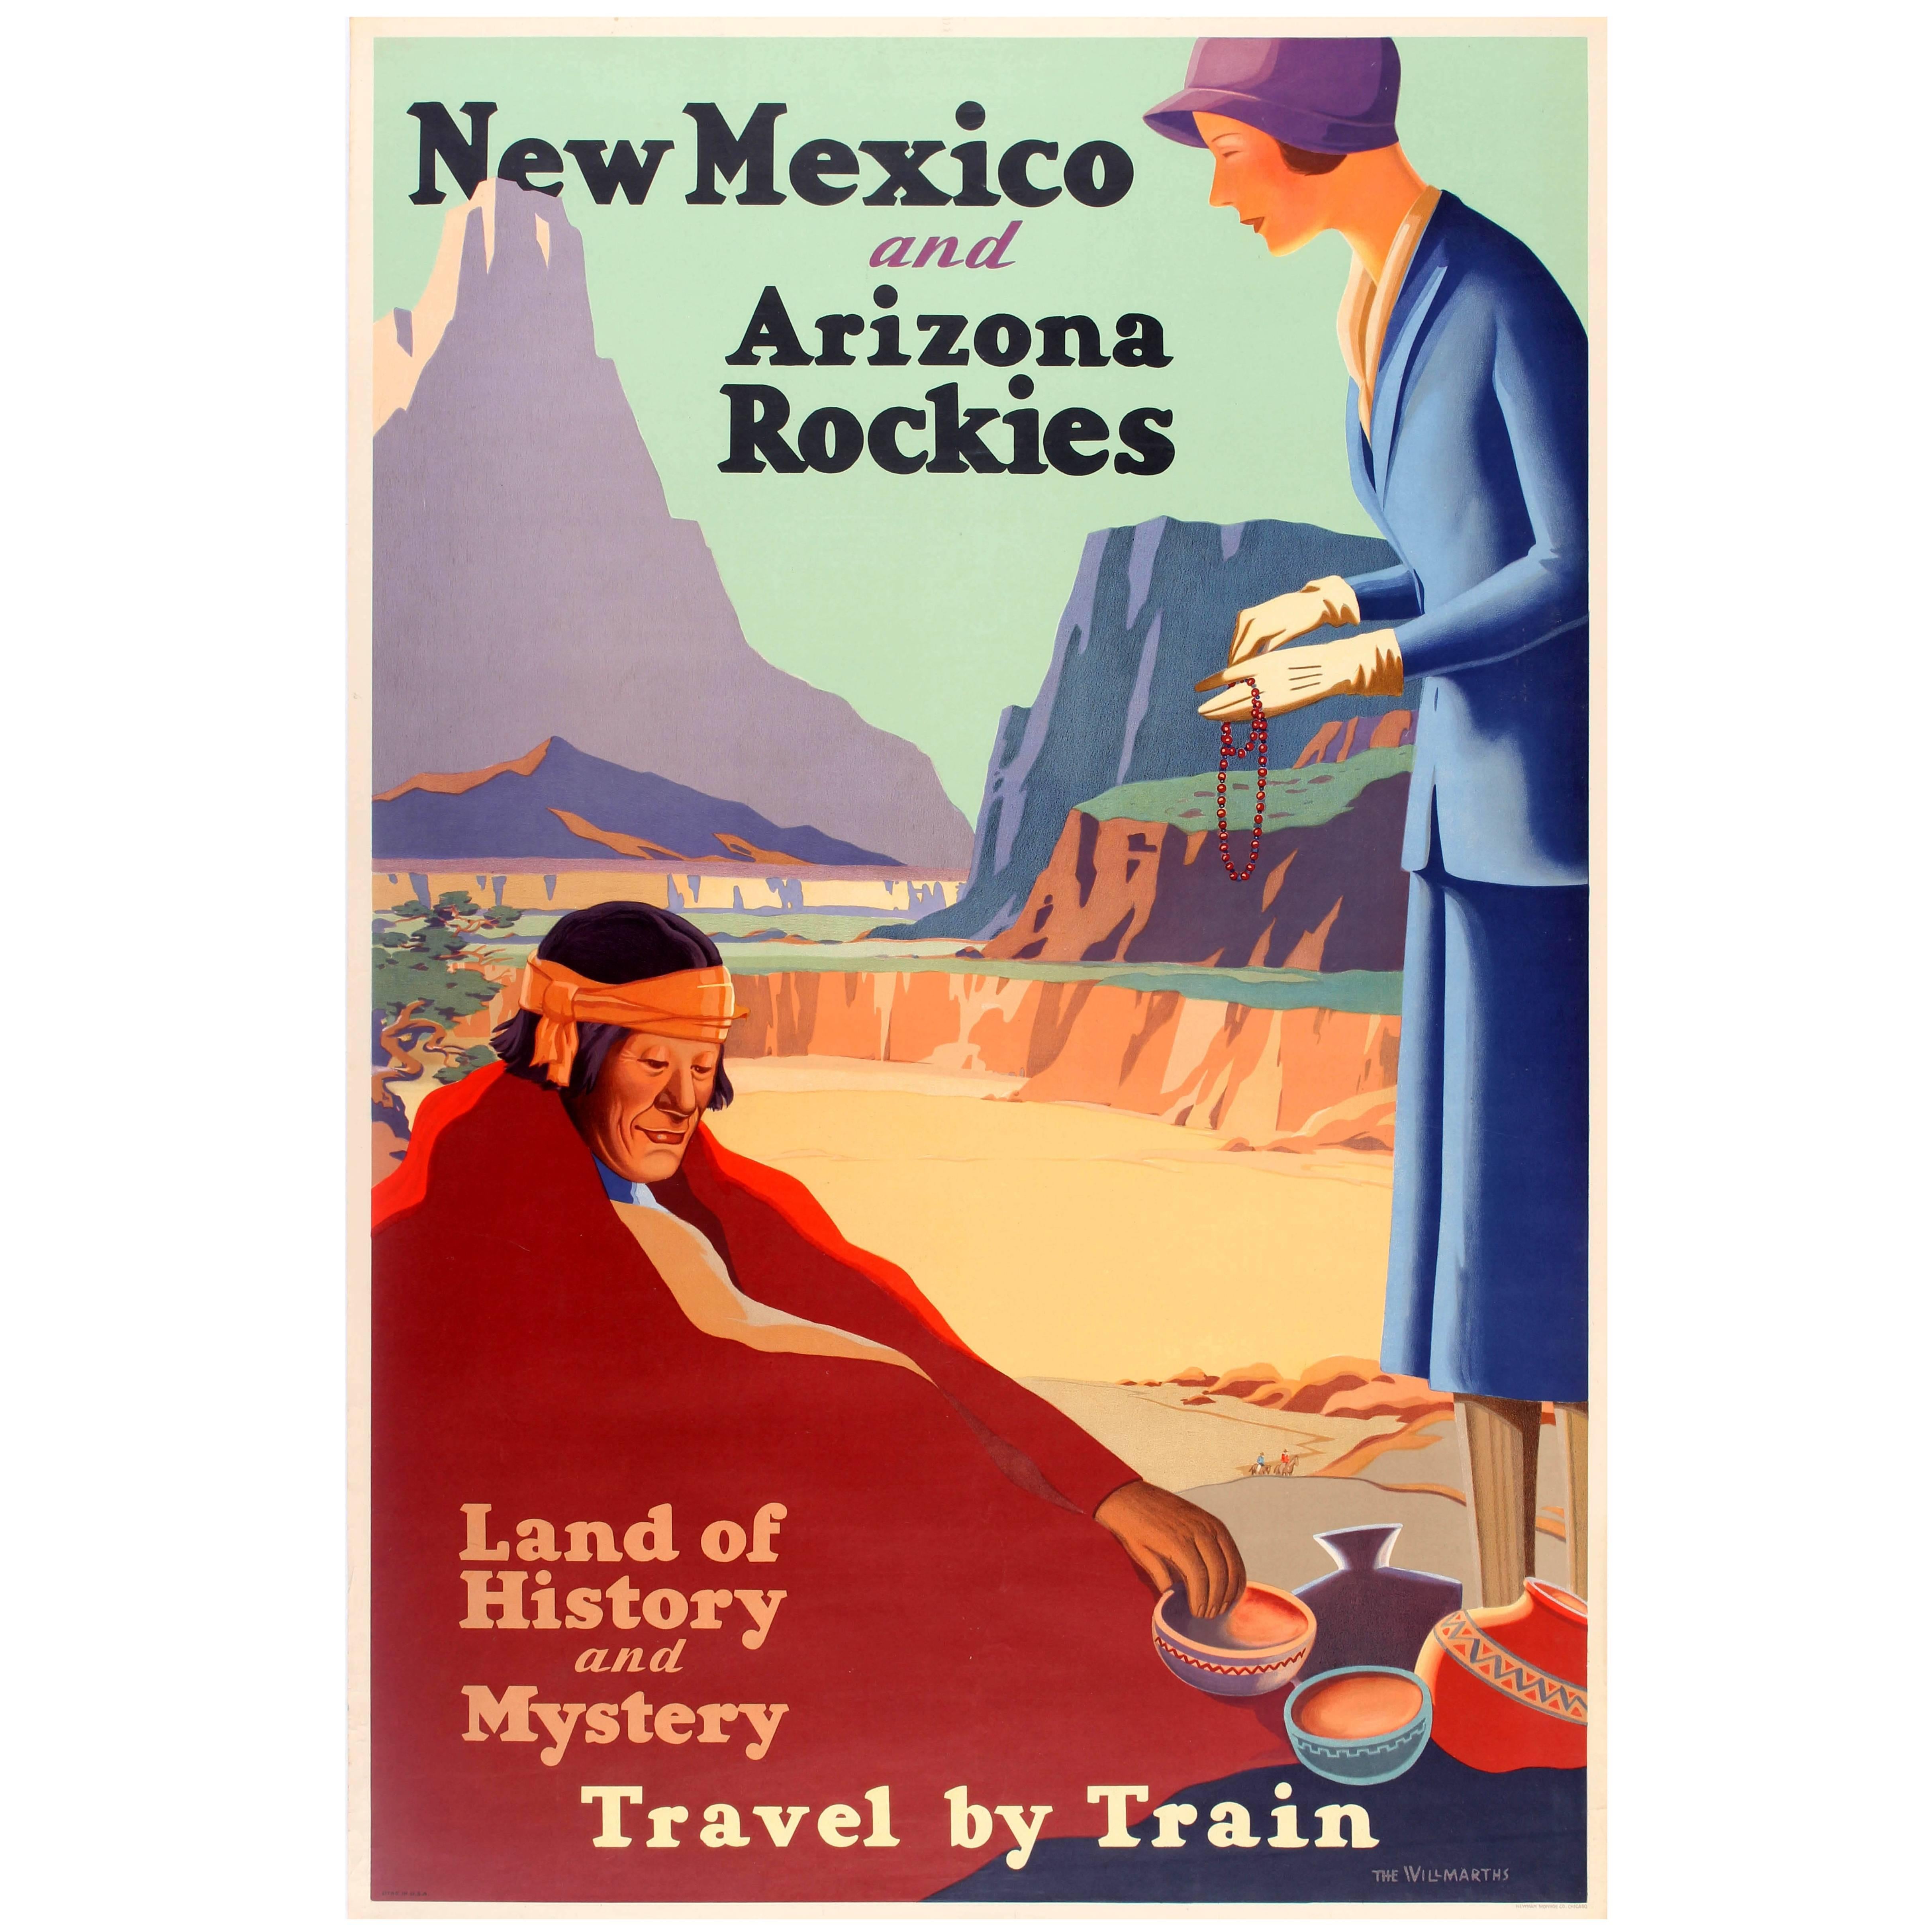 Original 1920s Travel Poster Advertising New Mexico and Arizona Rockies by Train